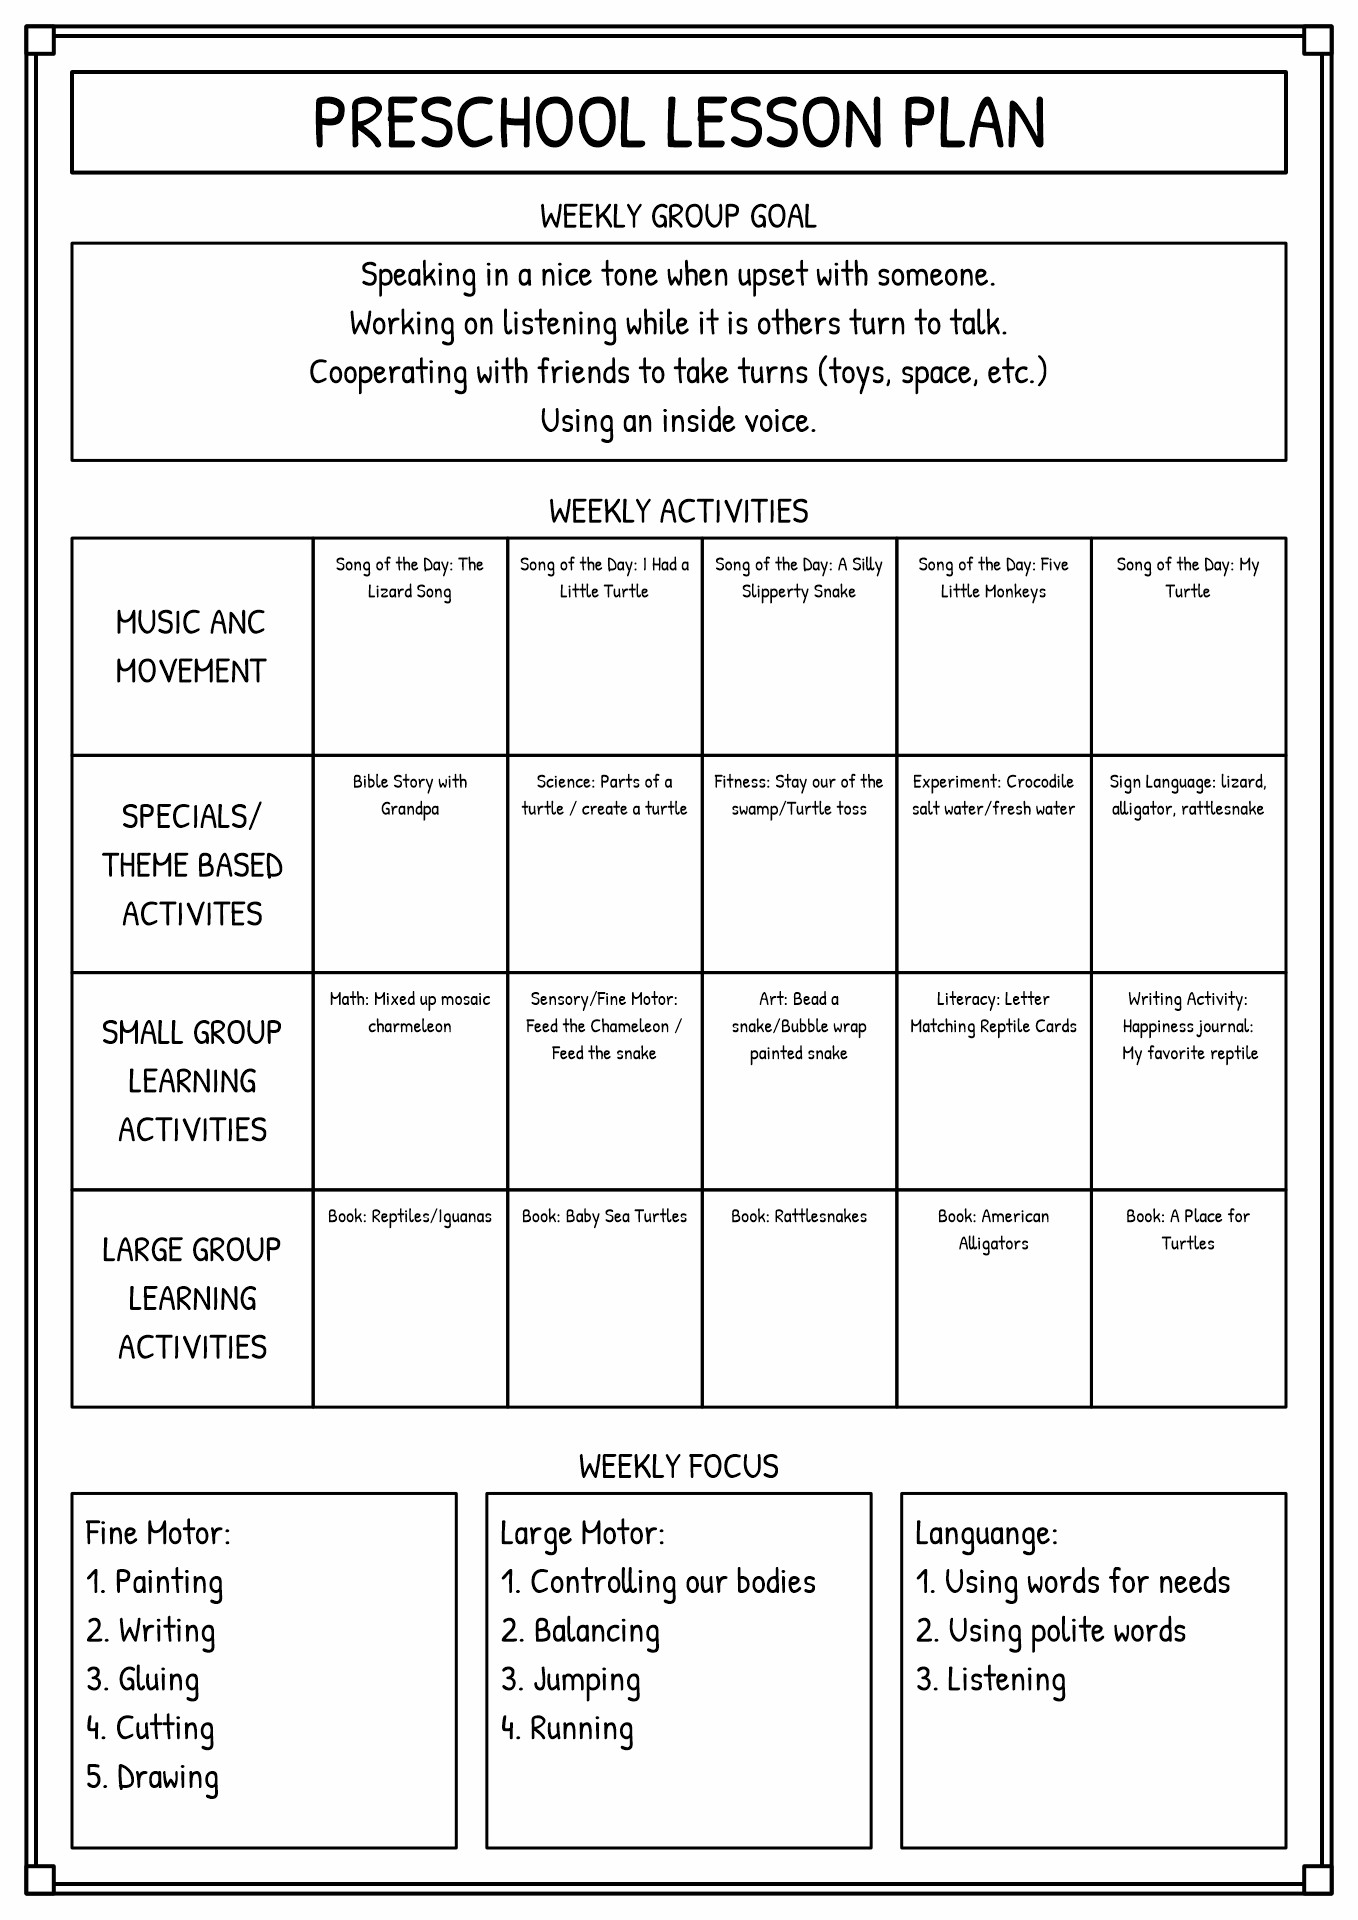 Examples of Preschool Lesson Plan Goals and Objectives